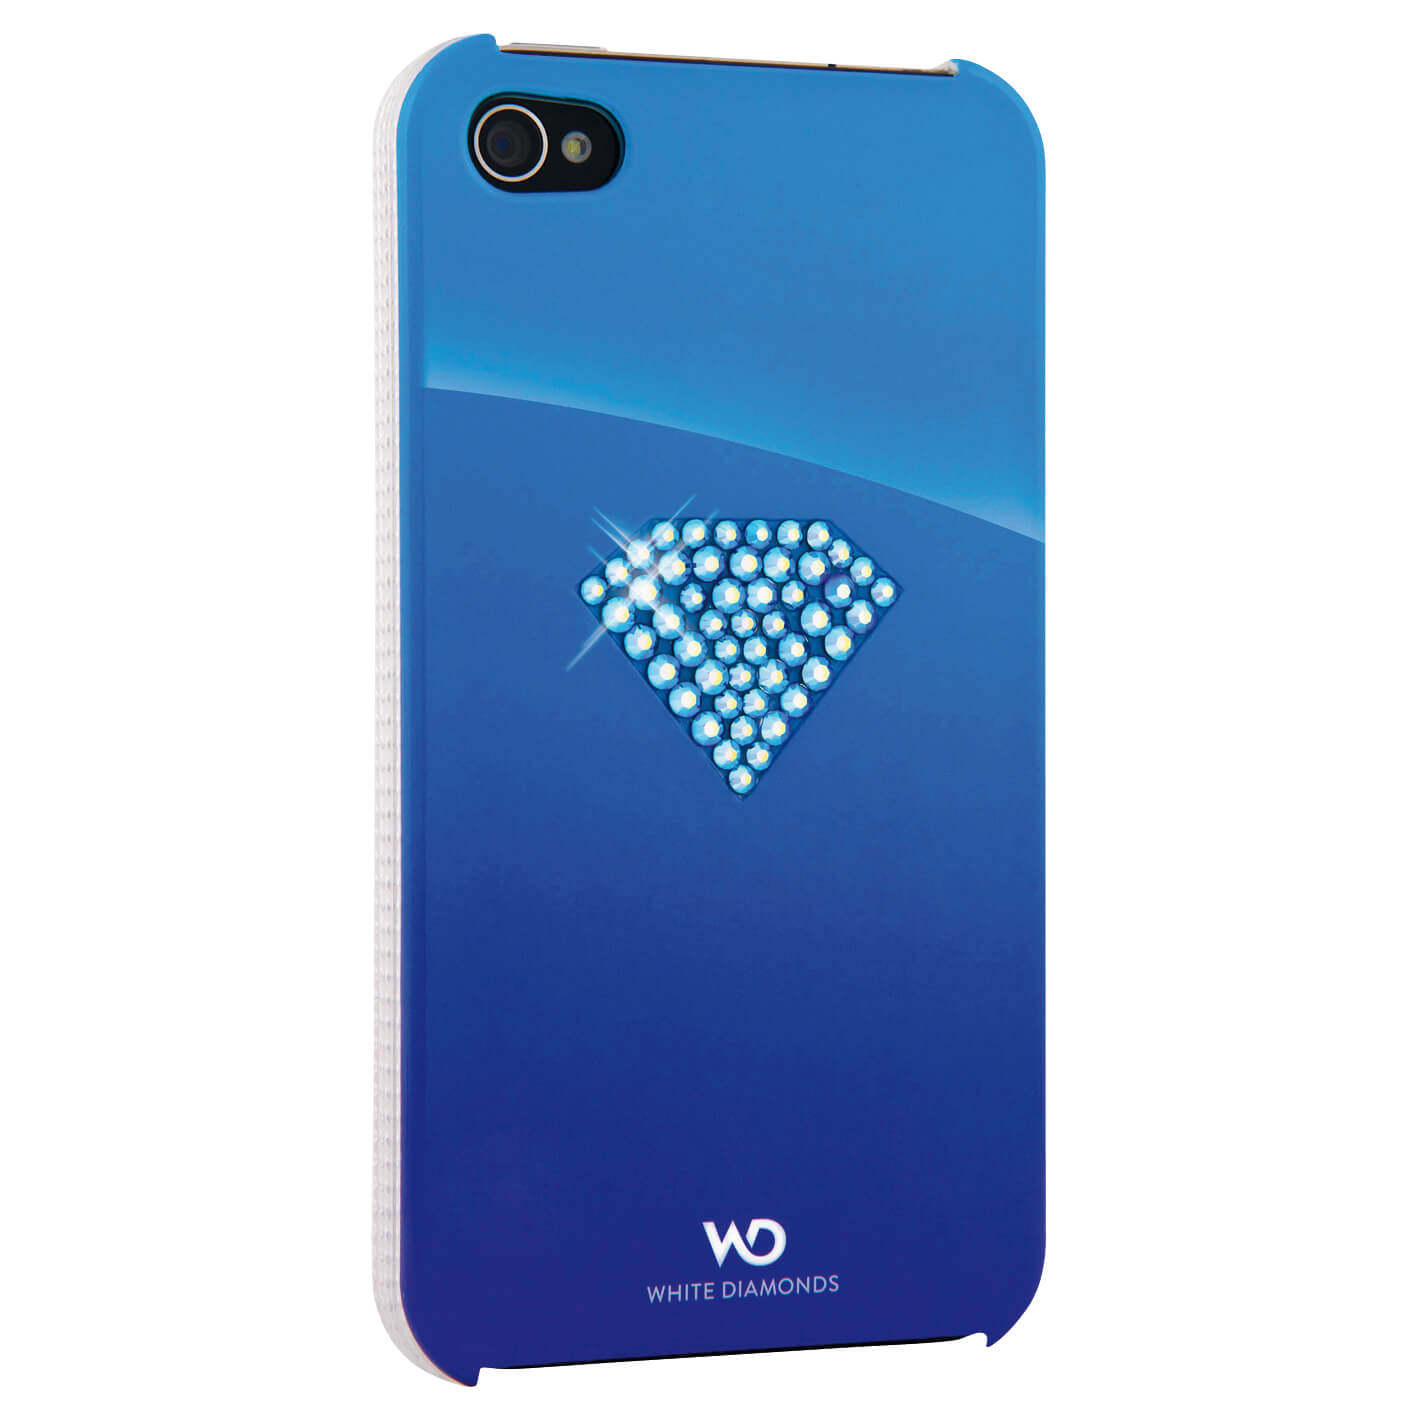 Rainbow Mobile Phone Cover fo r Apple iPhone 4/4S, blue